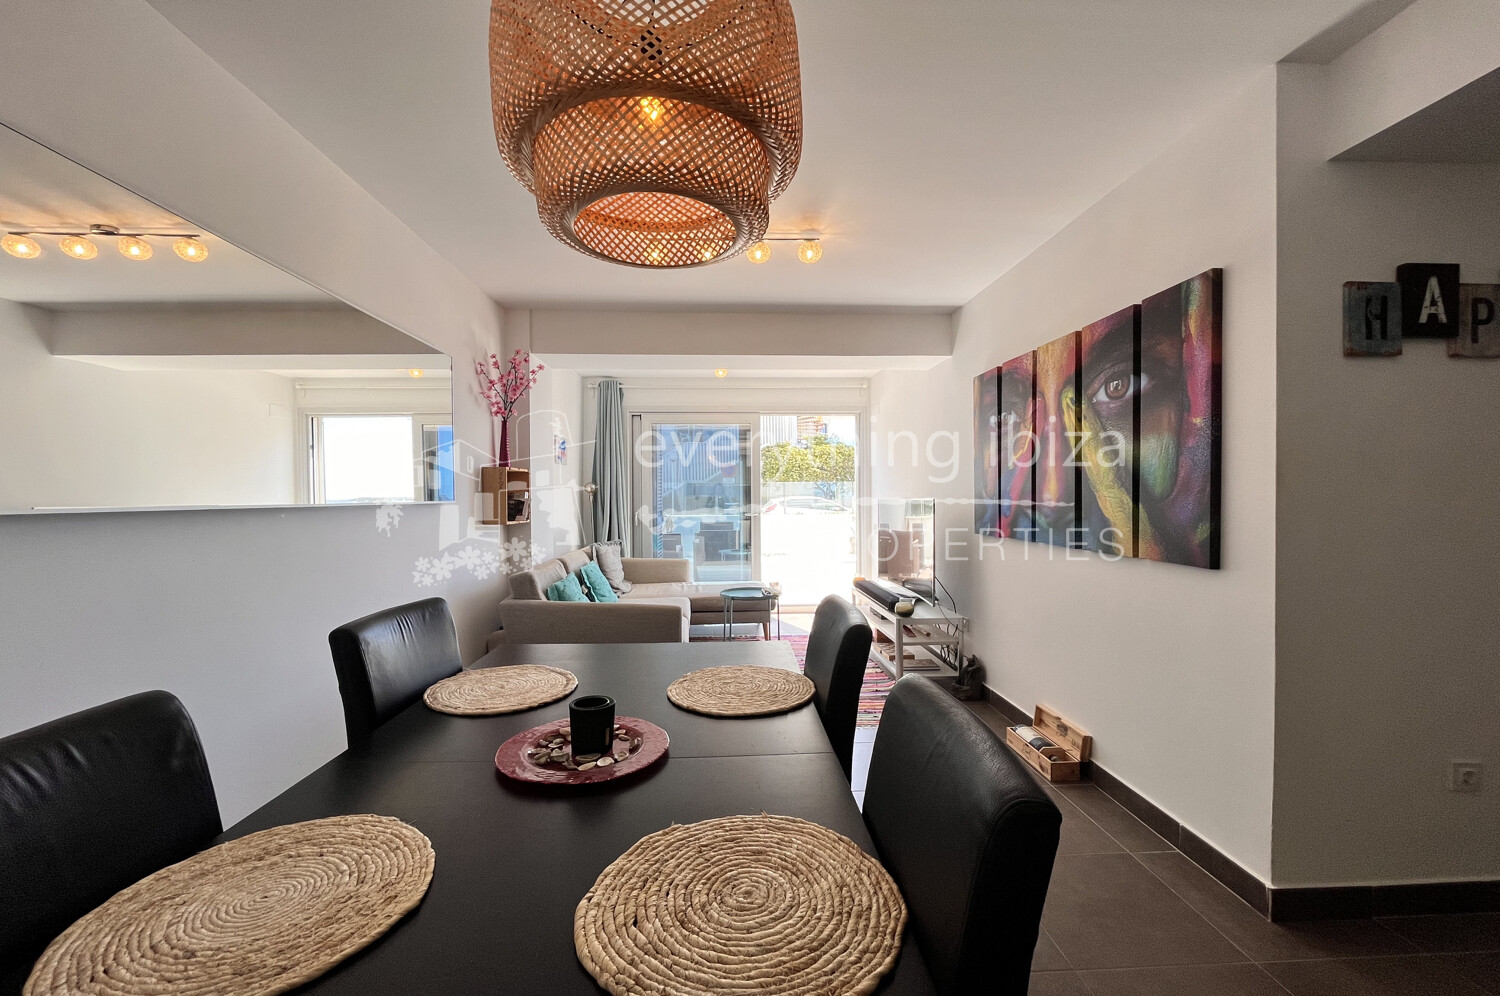 Modern Ground Floor Apartment Close to the Sea and Coastline, ref. 1693, for sale in Ibiza by everything ibiza Properties